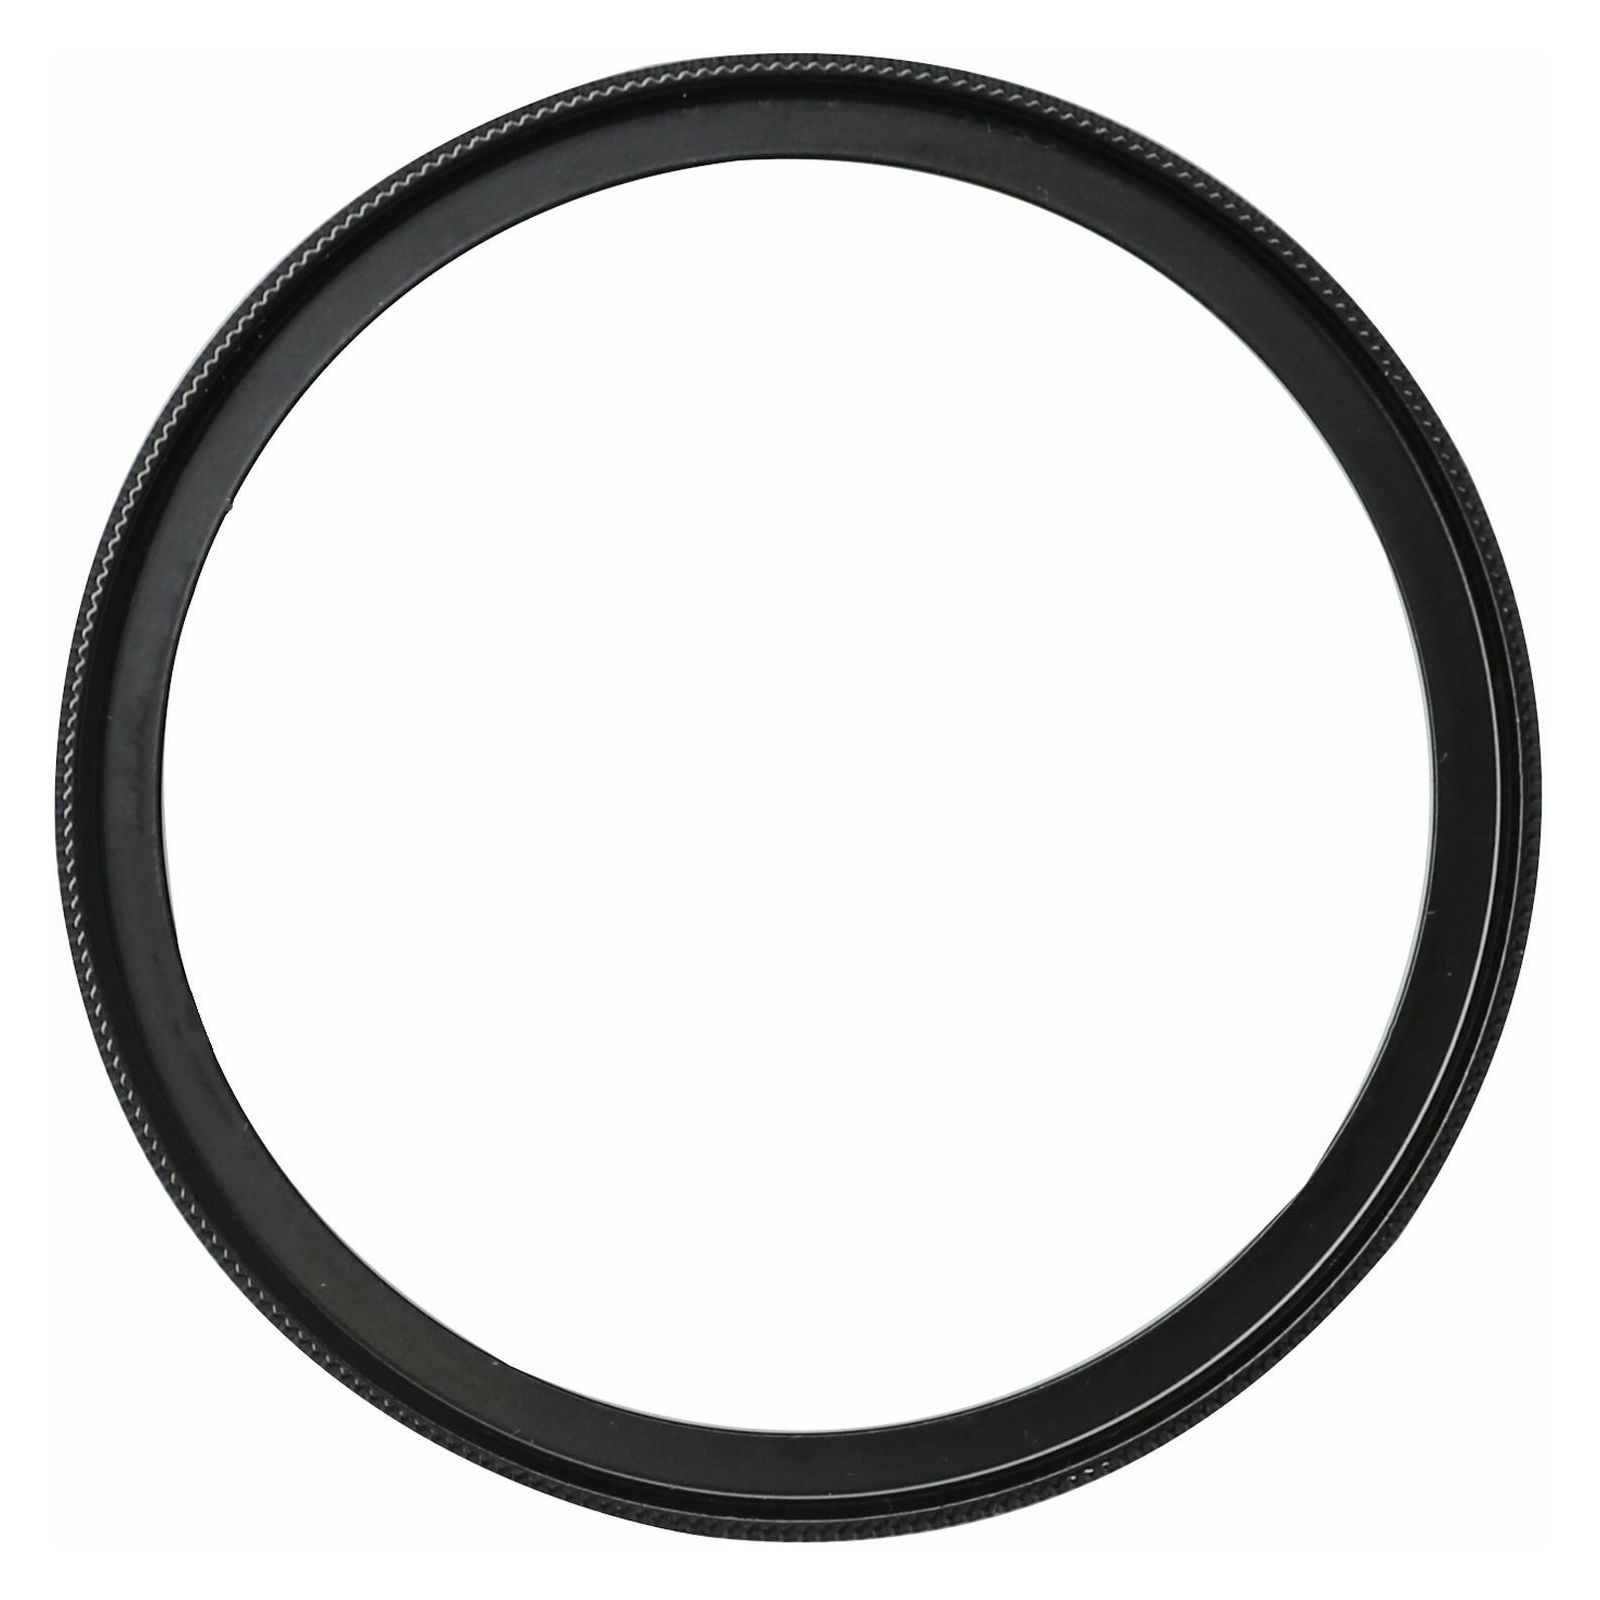 DJI Zenmuse X5S Spare Part 02 Balancing Ring for Panasonic 15mm F/1.7 ASPH Prime Lens